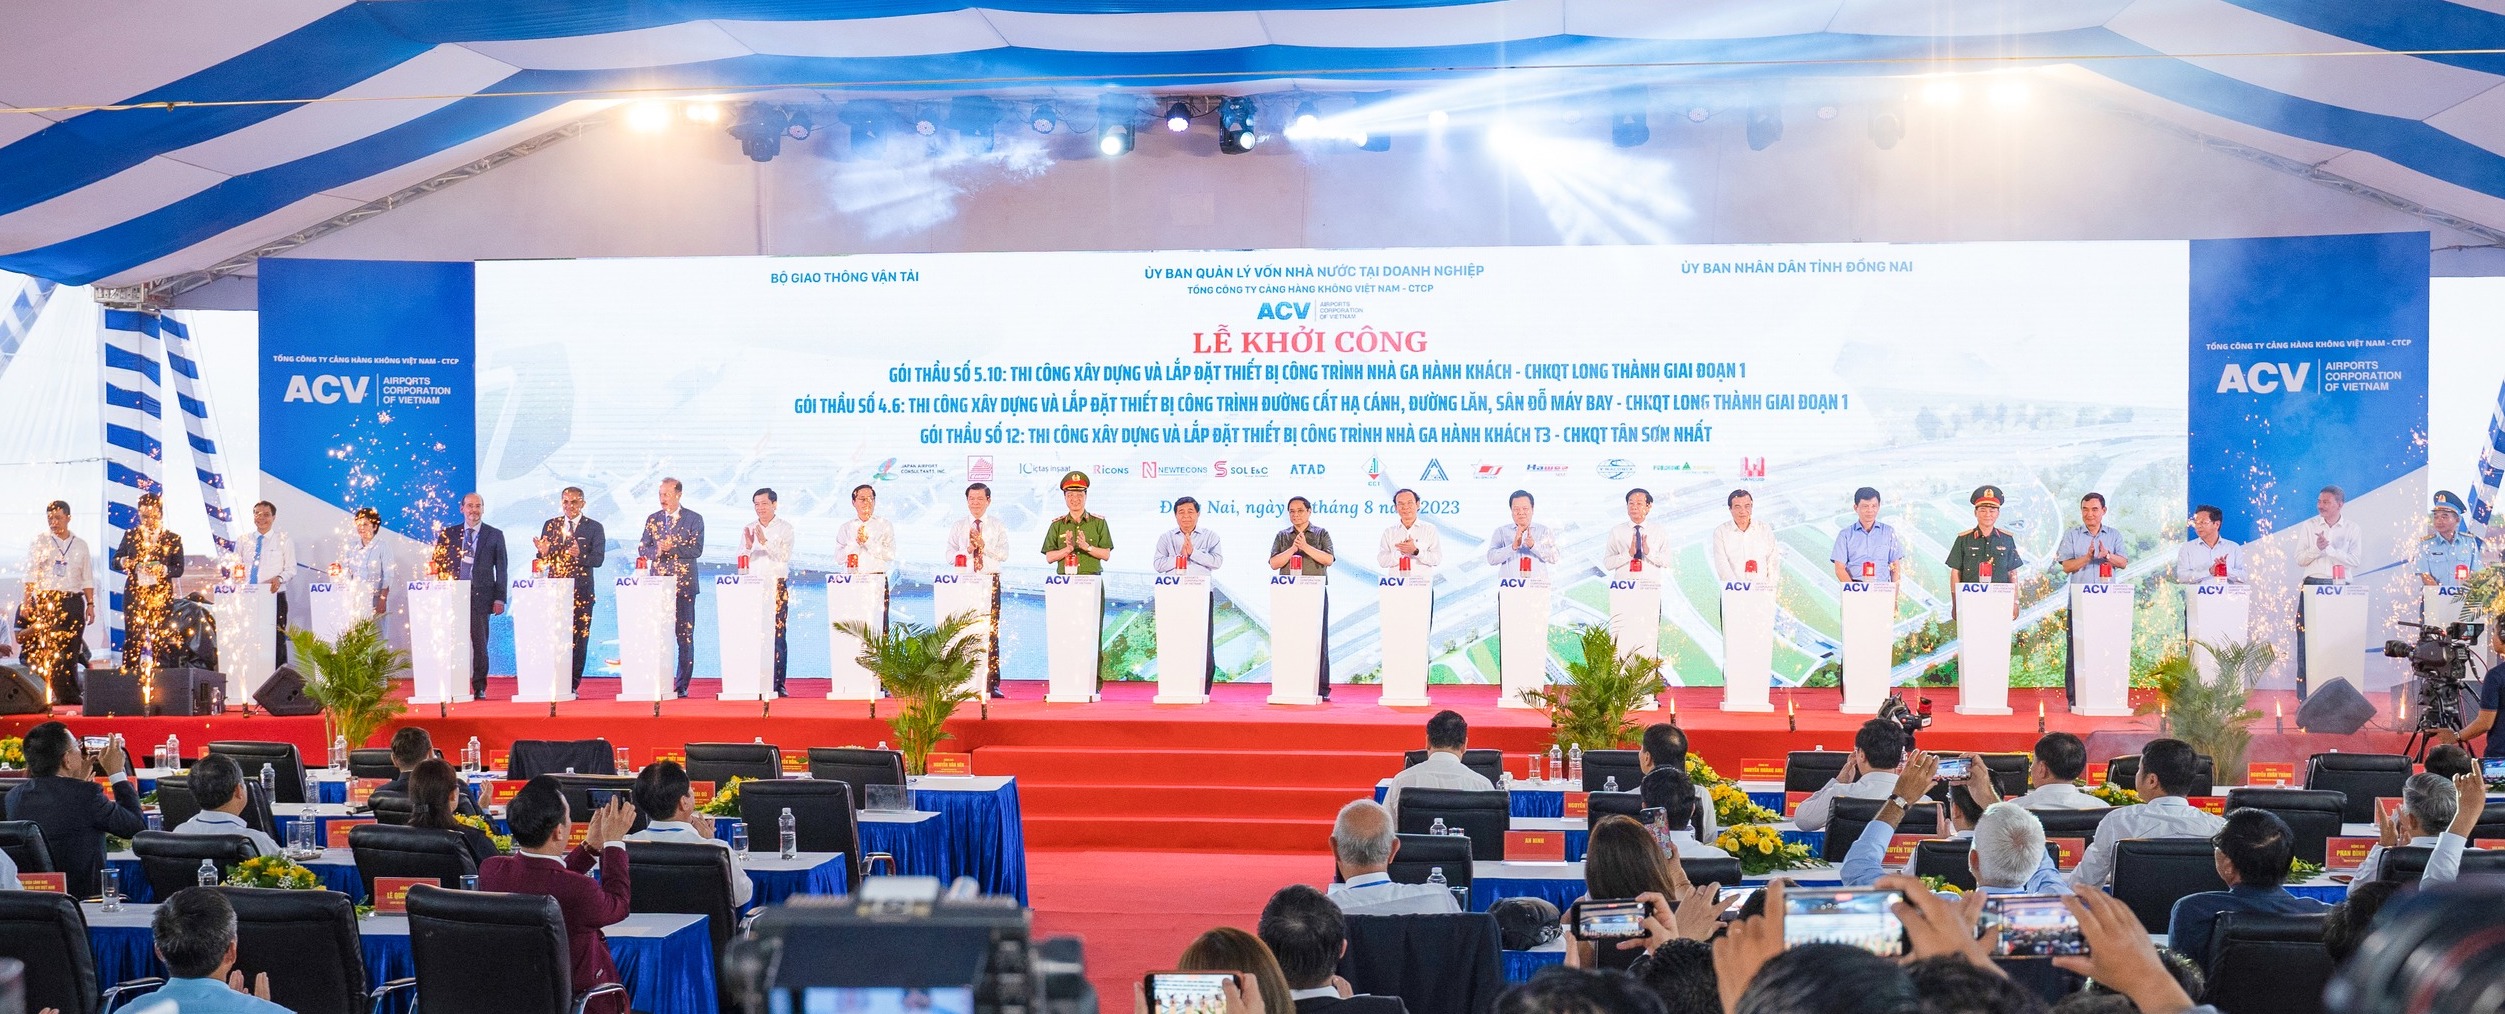 GROUND-BREAKING CEREMONY OF LONG THANH INTERNATIONAL AIRPORT